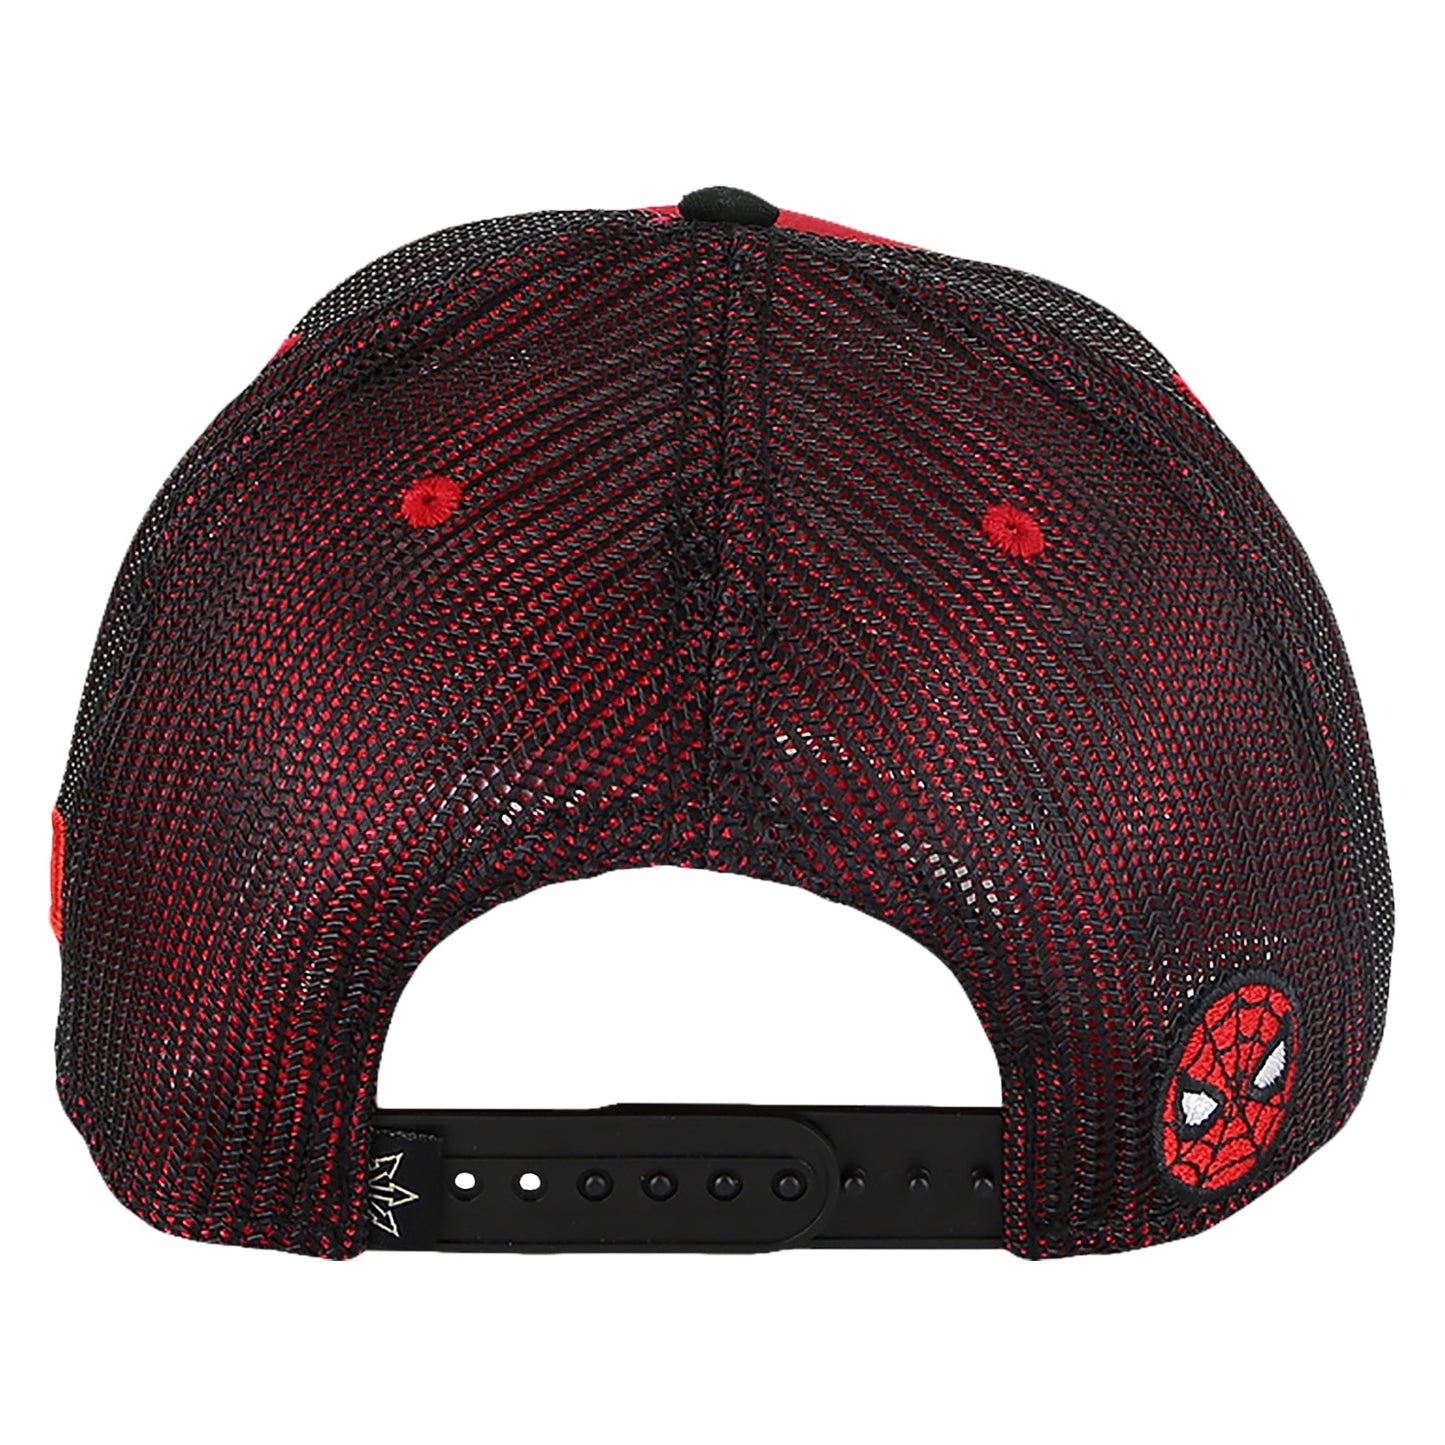 Spider-Man Baseball Cap in Red and Black